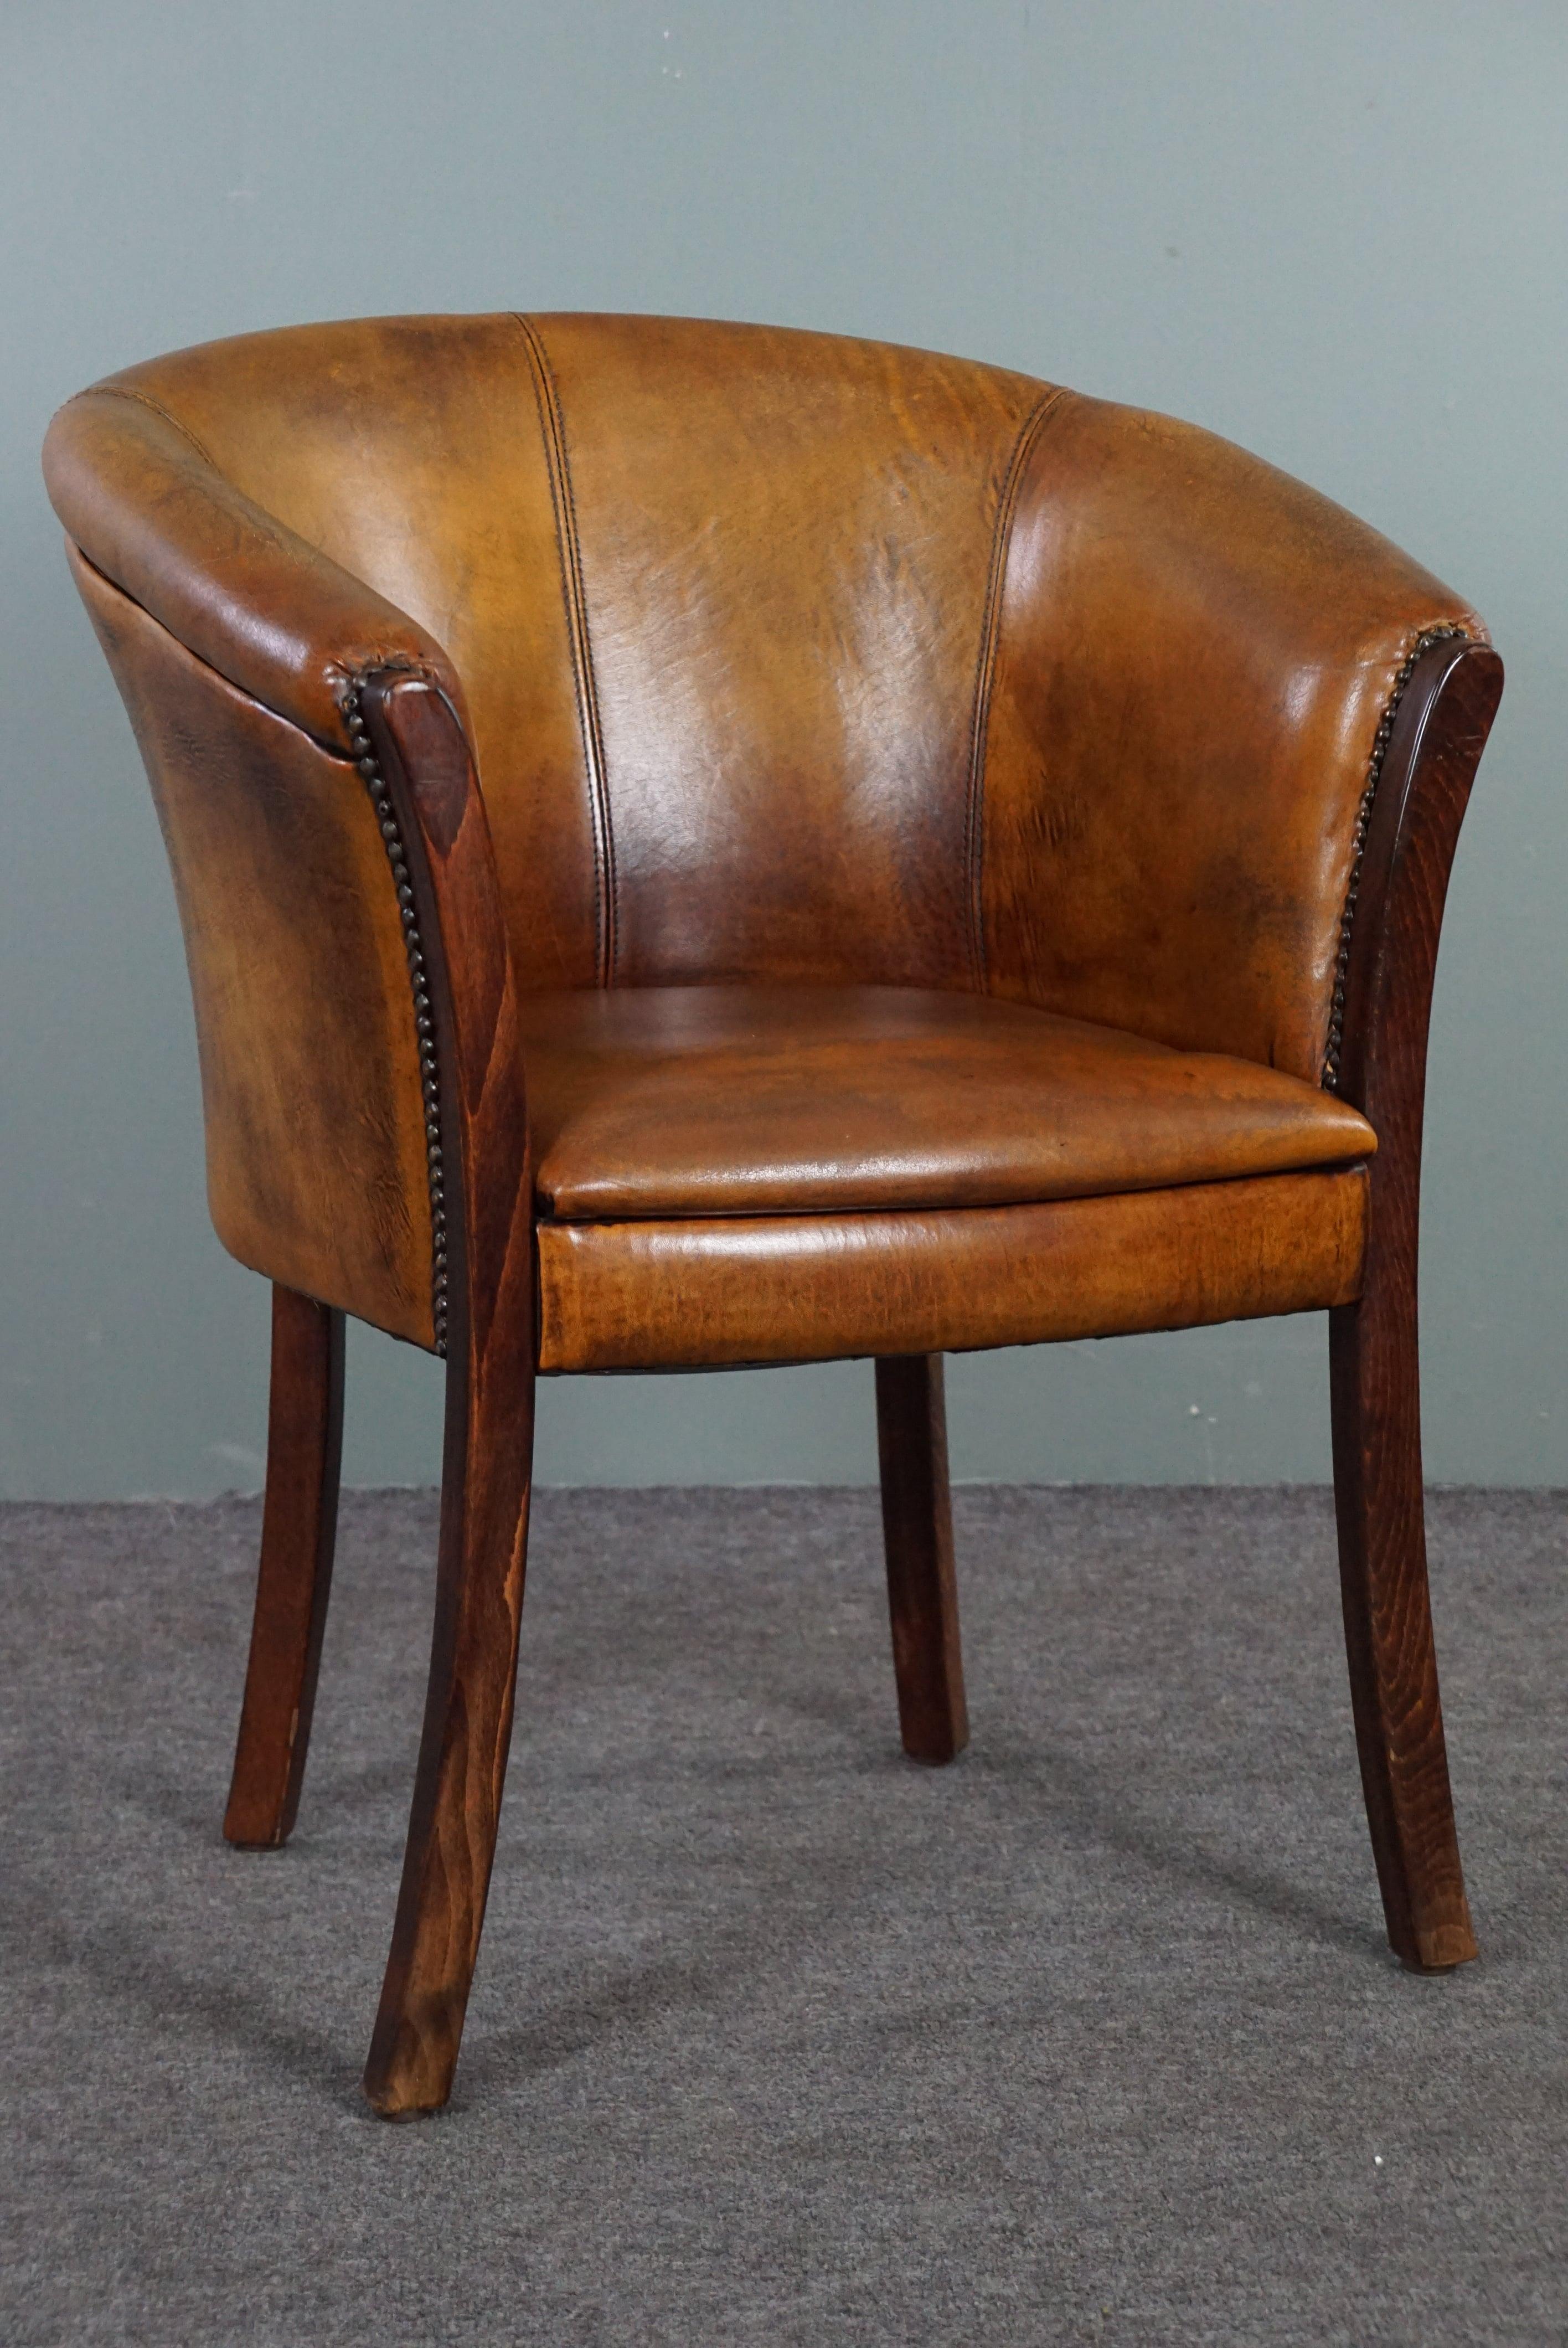 Offered is this beautiful sheep leather chair finished with decorative nails.

This sheep leather side chair/armchair is multifunctional due to its modest size and higher seat height. This makes this sheepskin tubchair suitable for use as a side